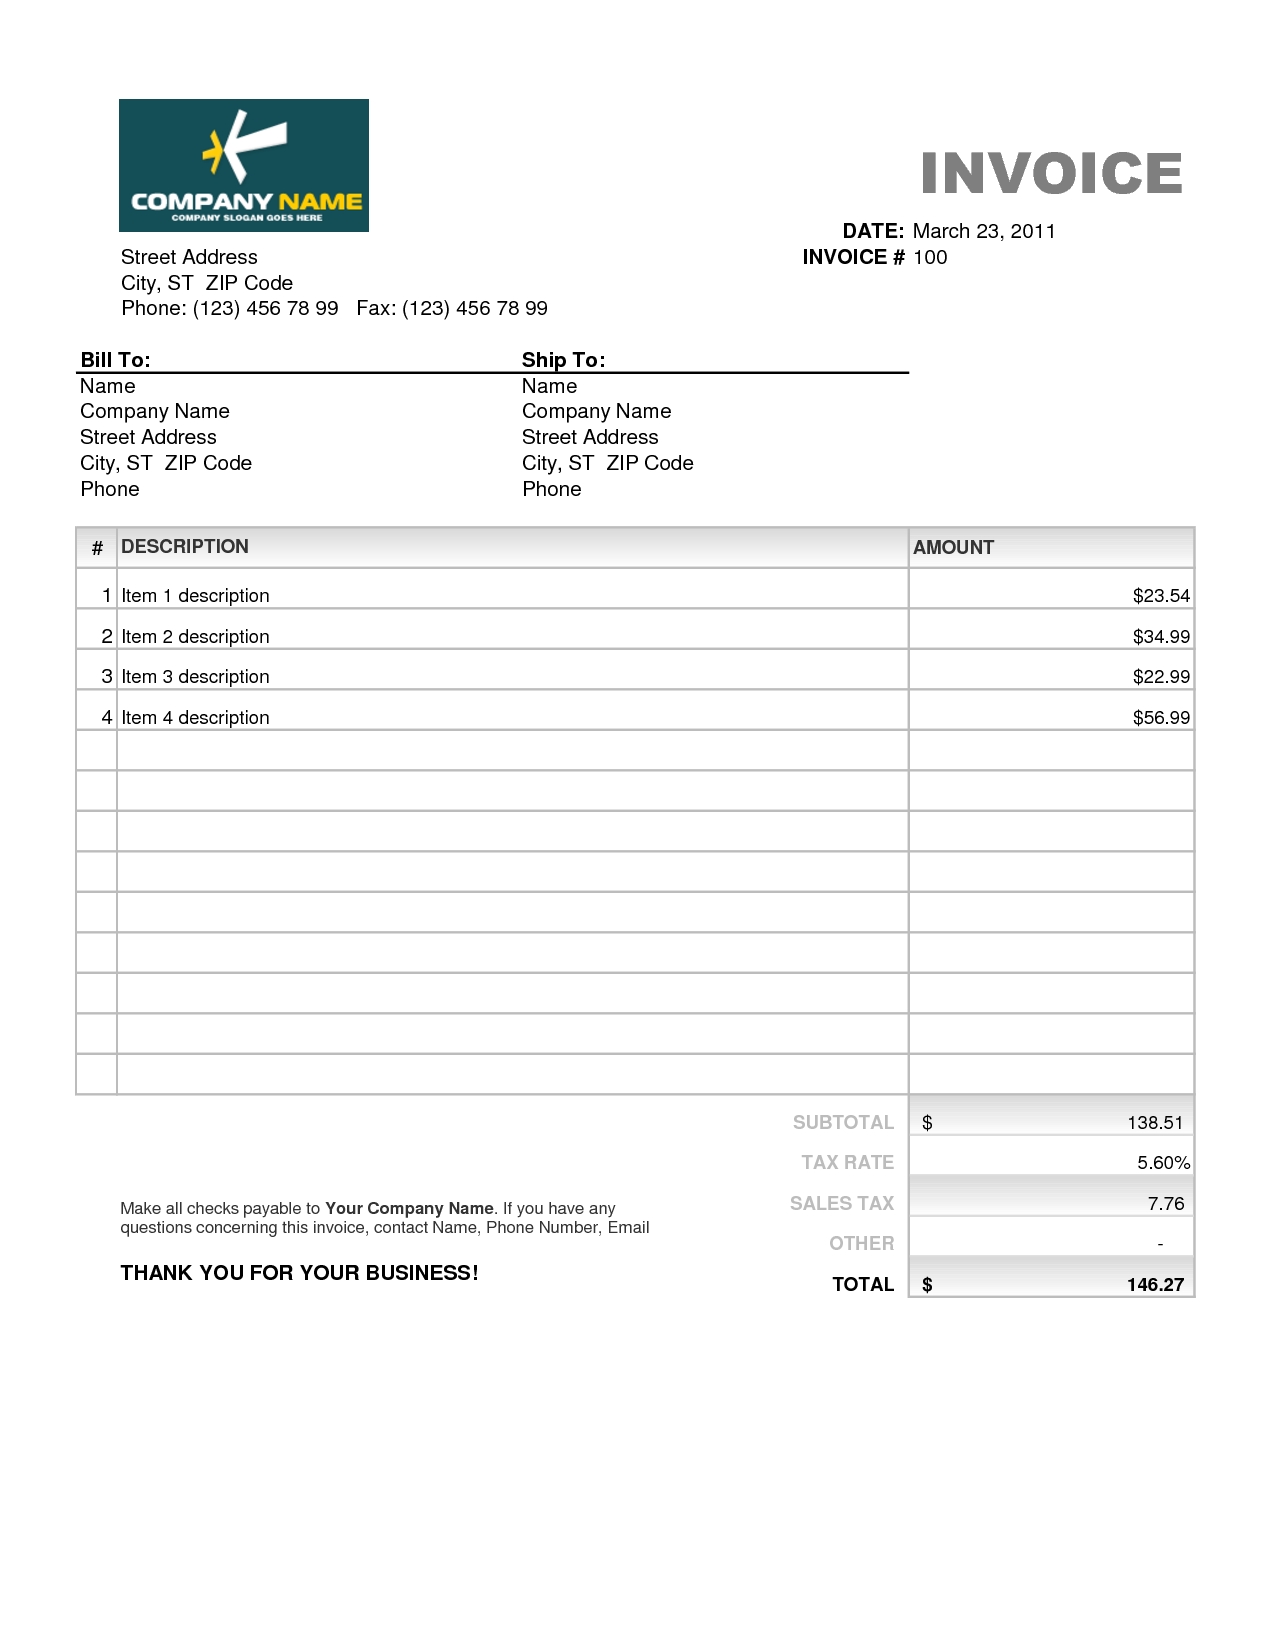 invoice template excel 10 invoice template excel best collection 1275 X 1650